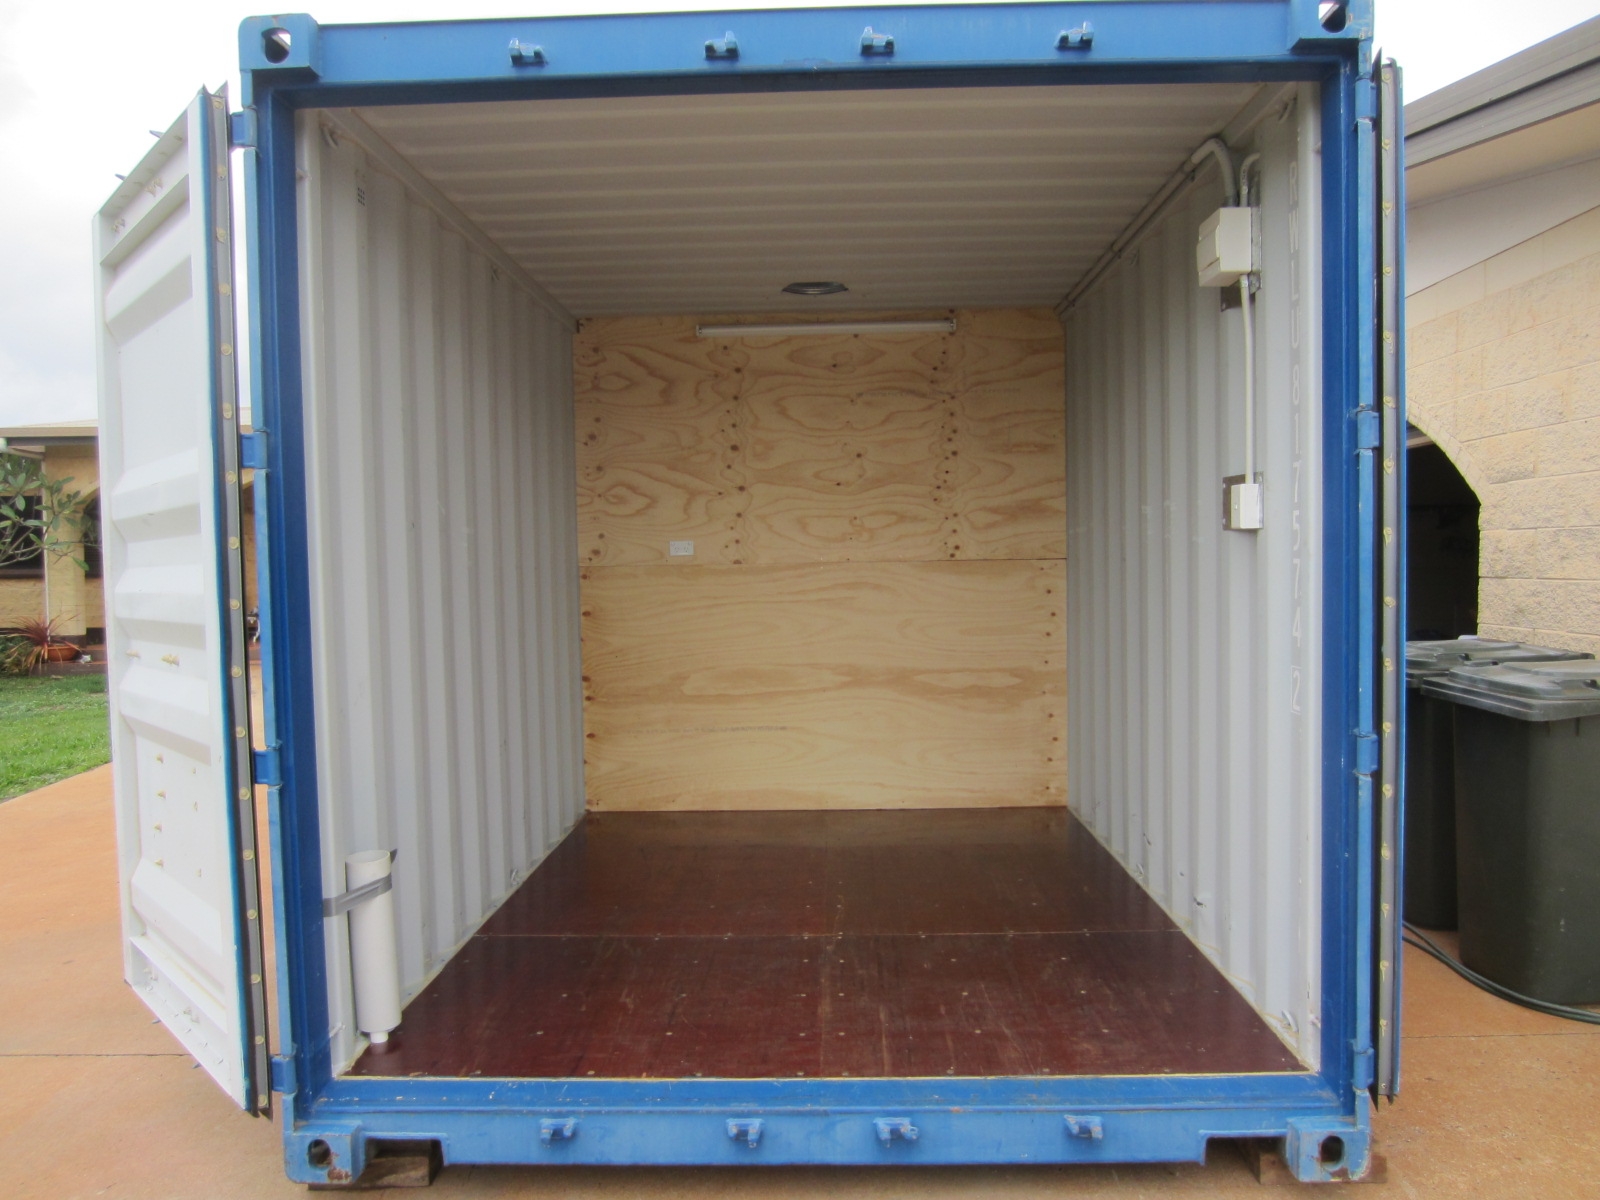 20' container modified into half ablution and half storeroom